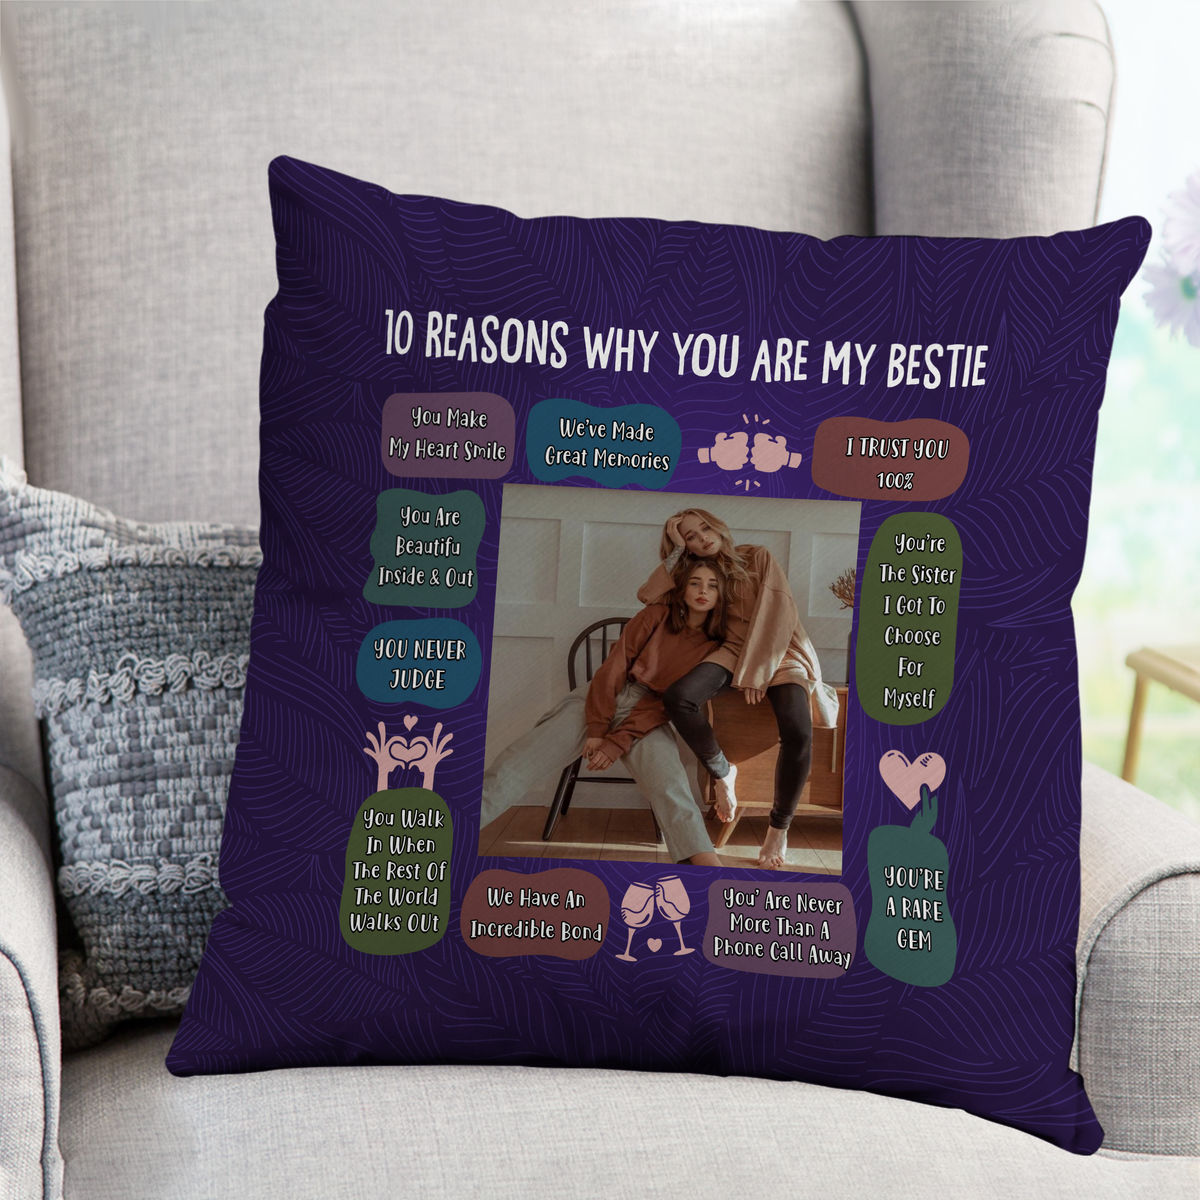 Photo Pillow - Photo Upload - 10 Reasons Why You Are My Bestie - Photo Gifts For Besties, Friends_3